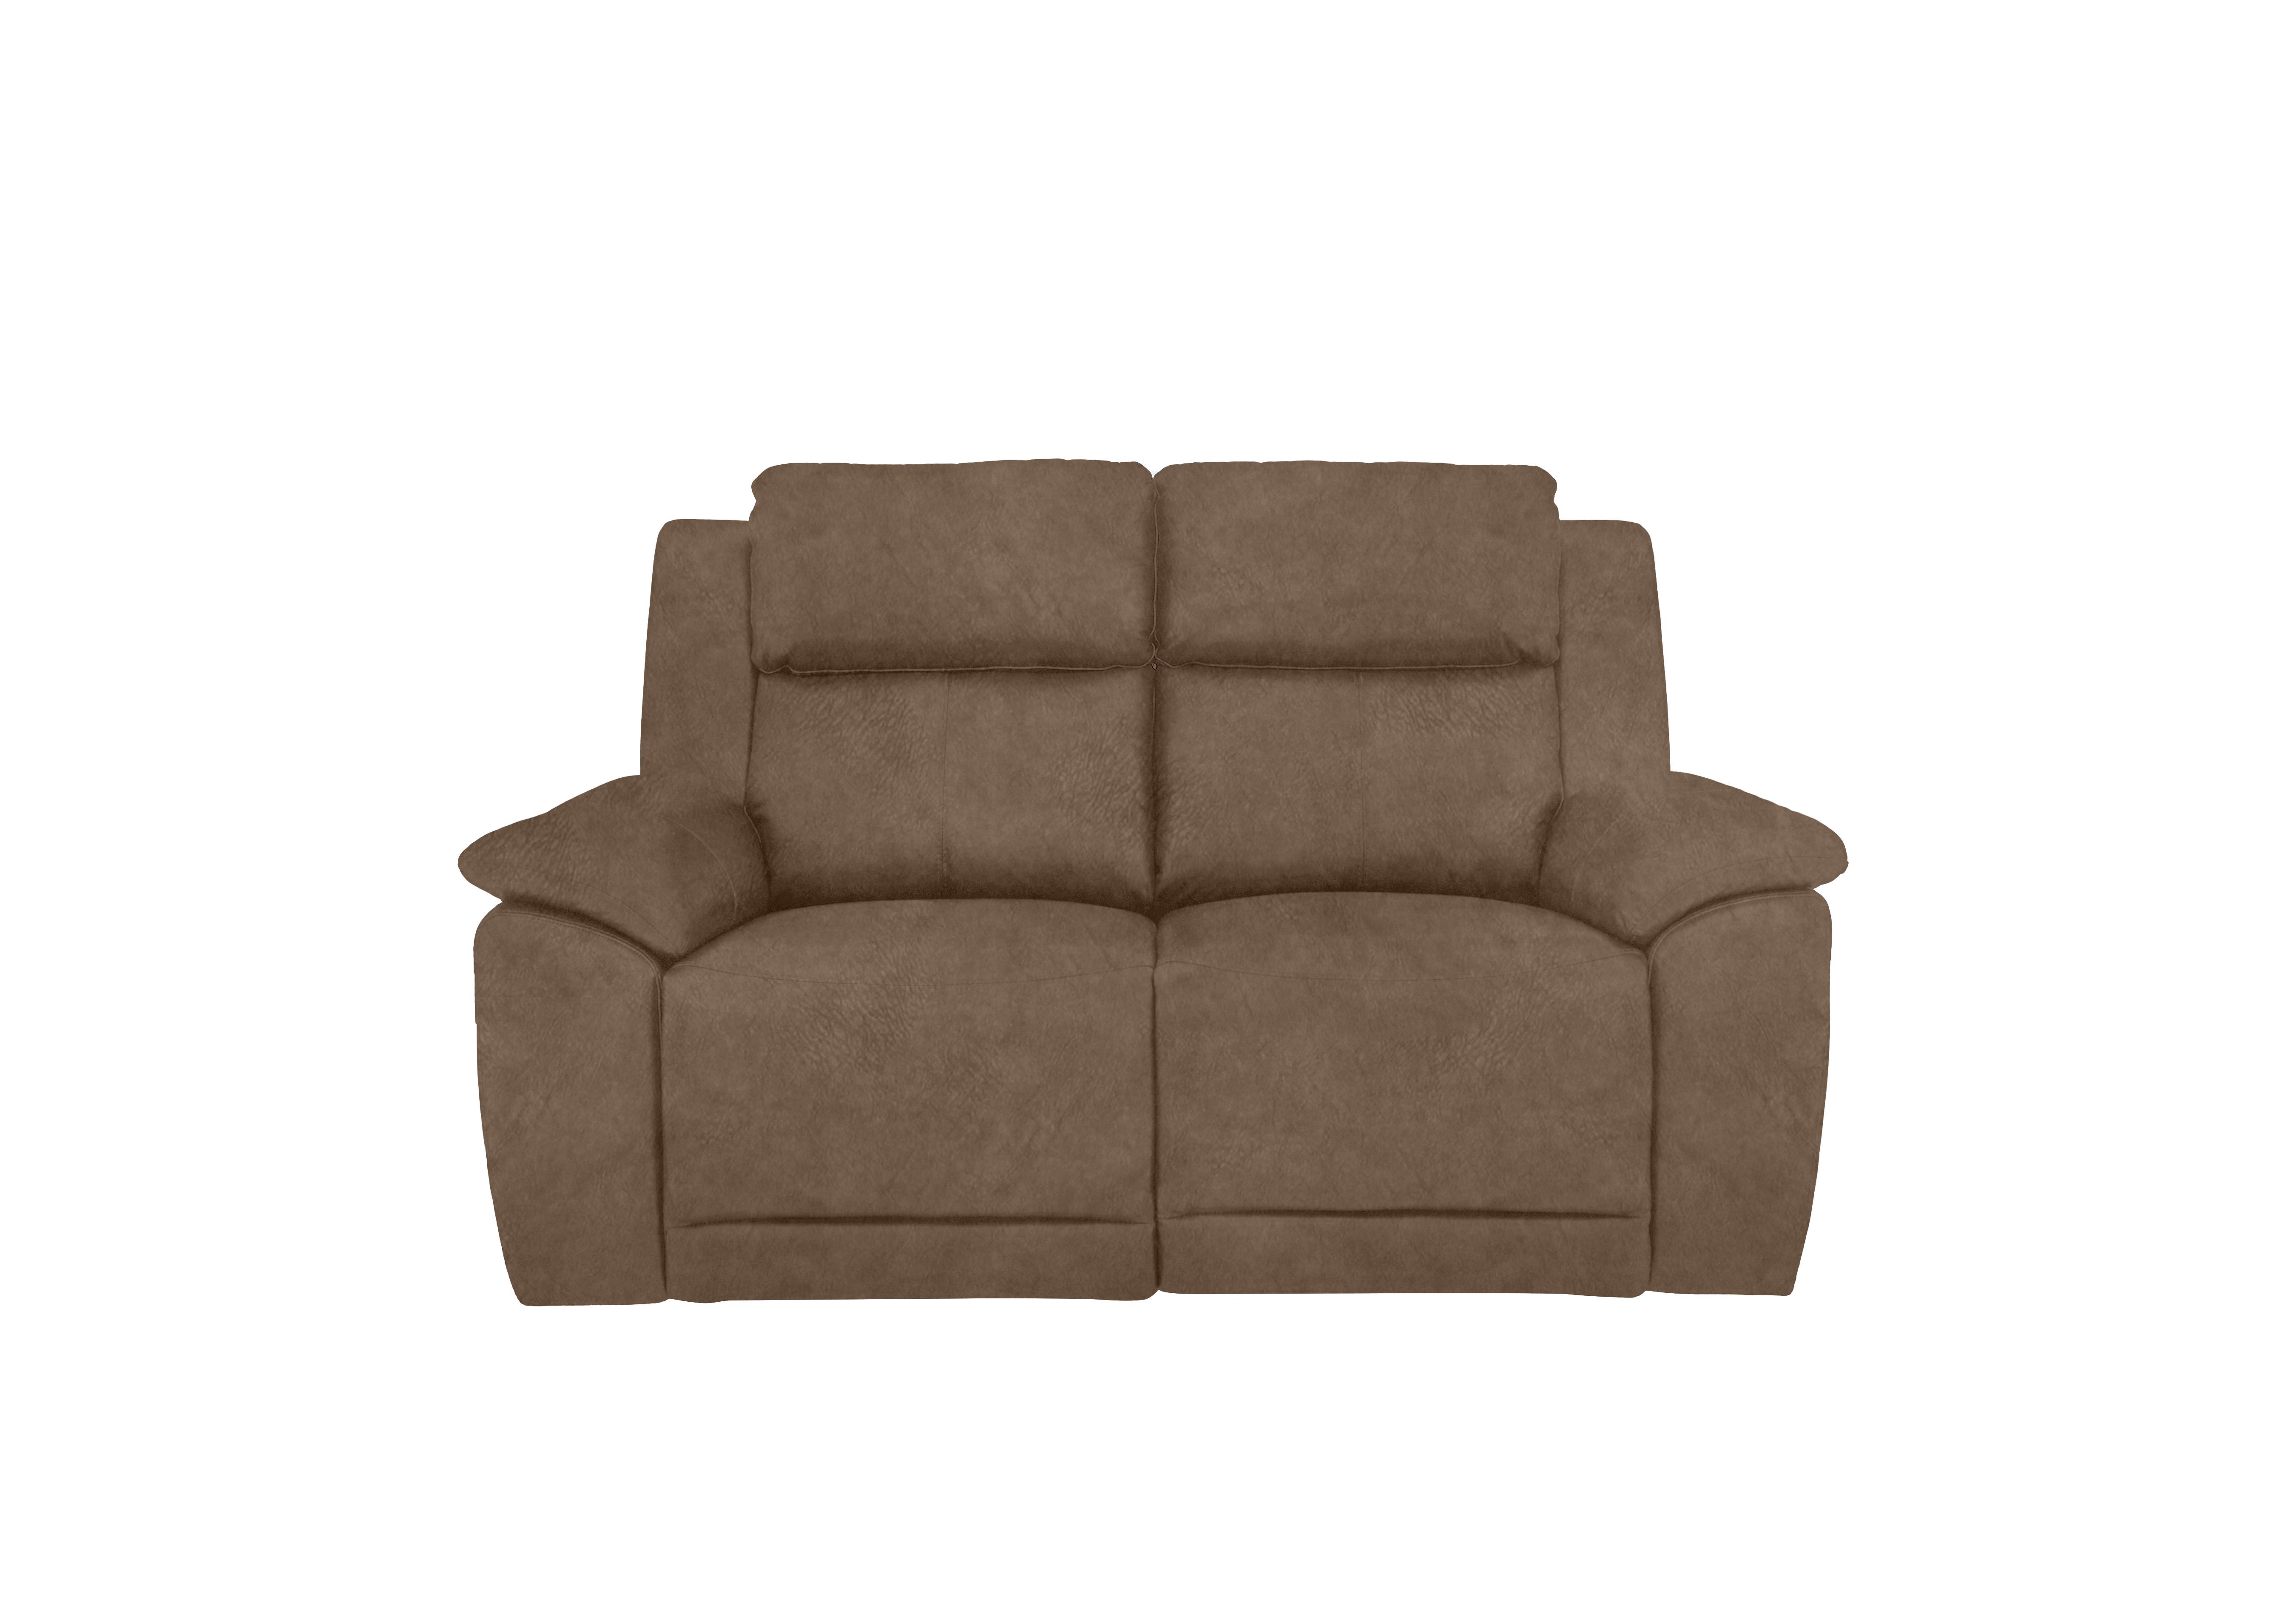 Utah 2 Seater Fabric Power Recliner Sofa with Power Headrests and Power Lumbar in Classic Brown Be-0105 on Furniture Village